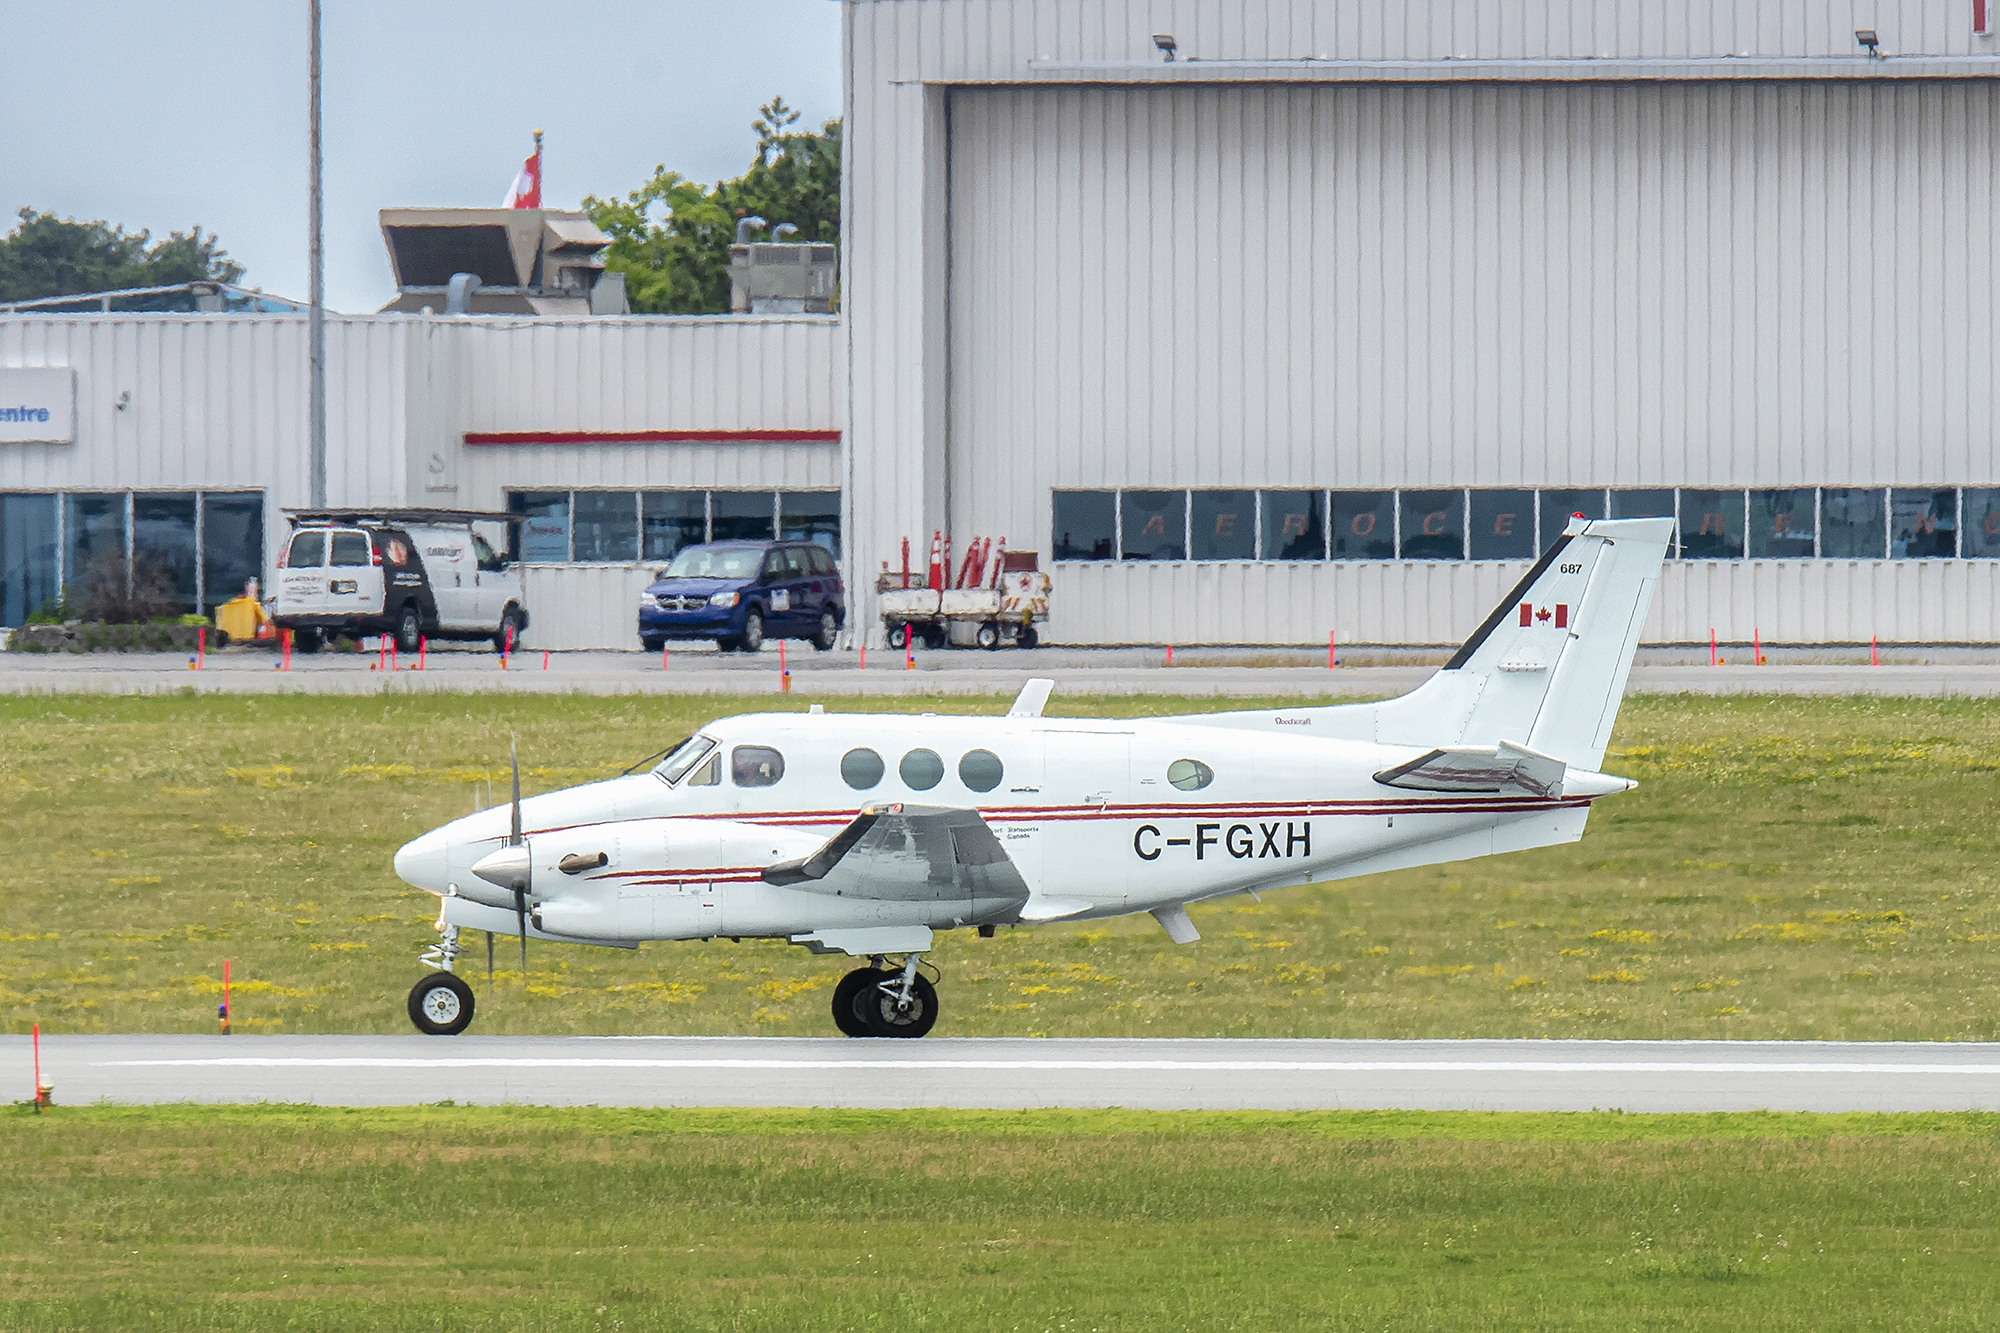 A small white twin propeller aircraft taxis on a runway in front of grey airport buildings.